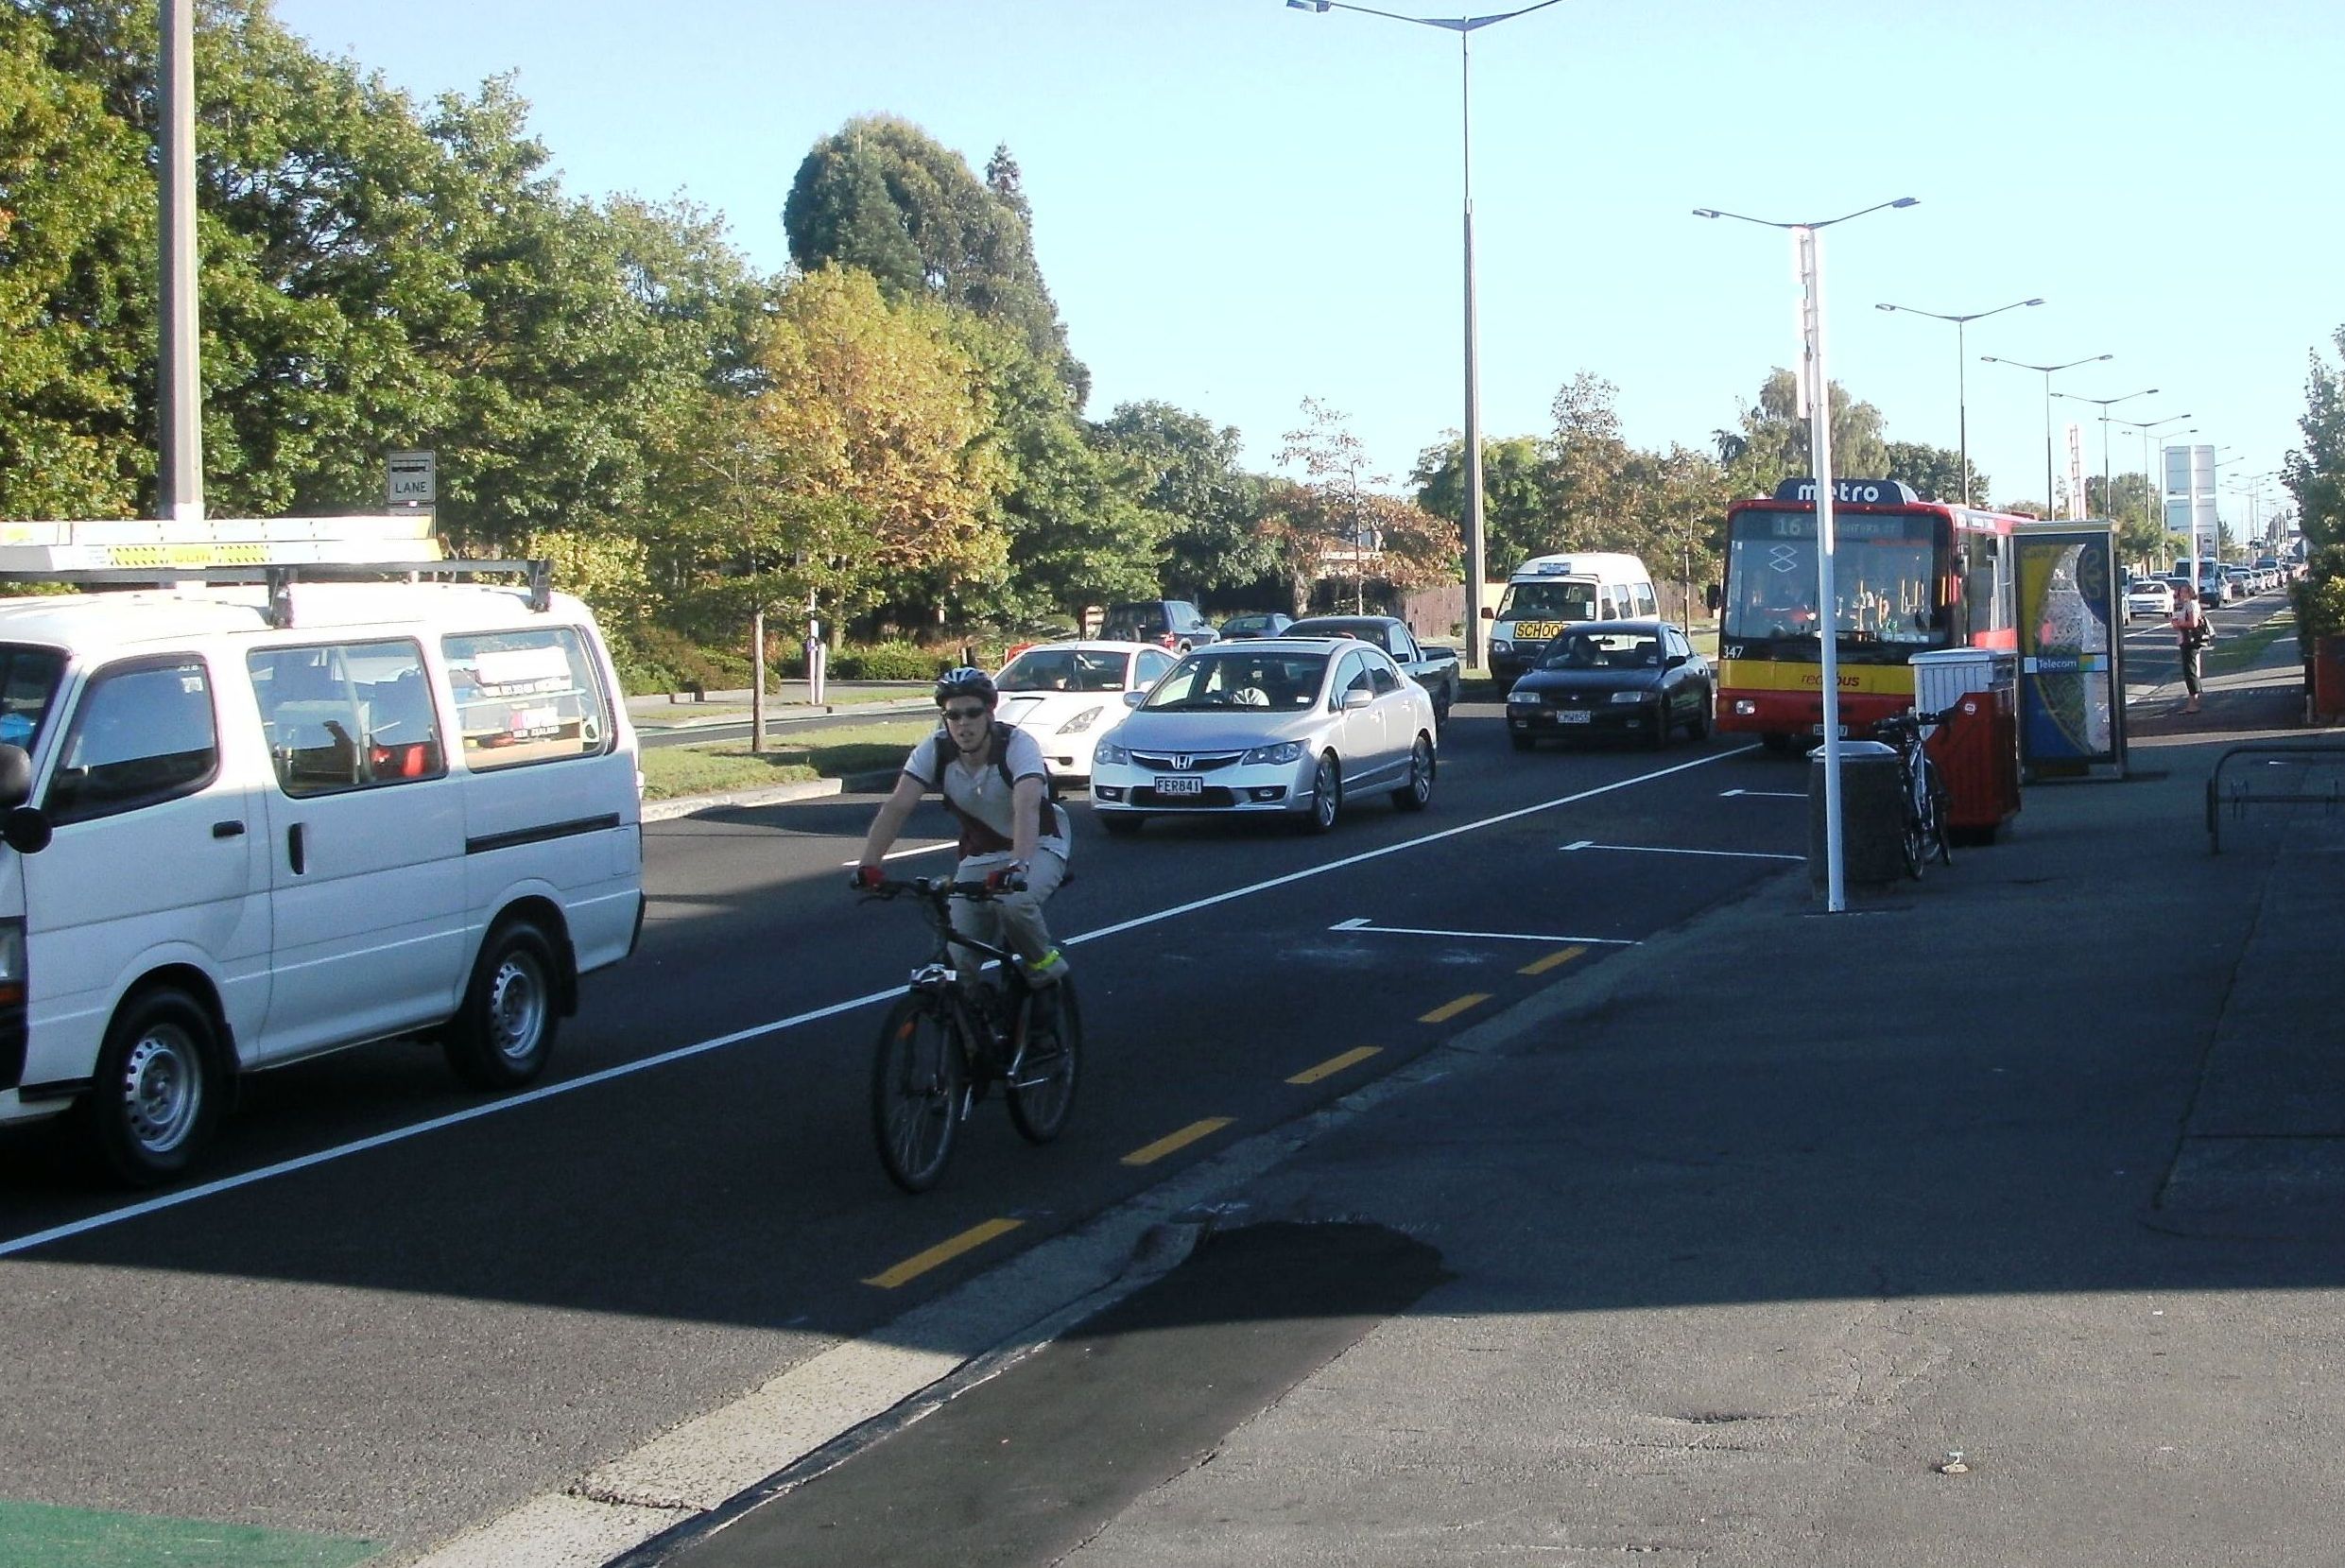 Two types of lane exist - narrow (as in this example) and wide, where buses and cyclists can easily overtake each other.